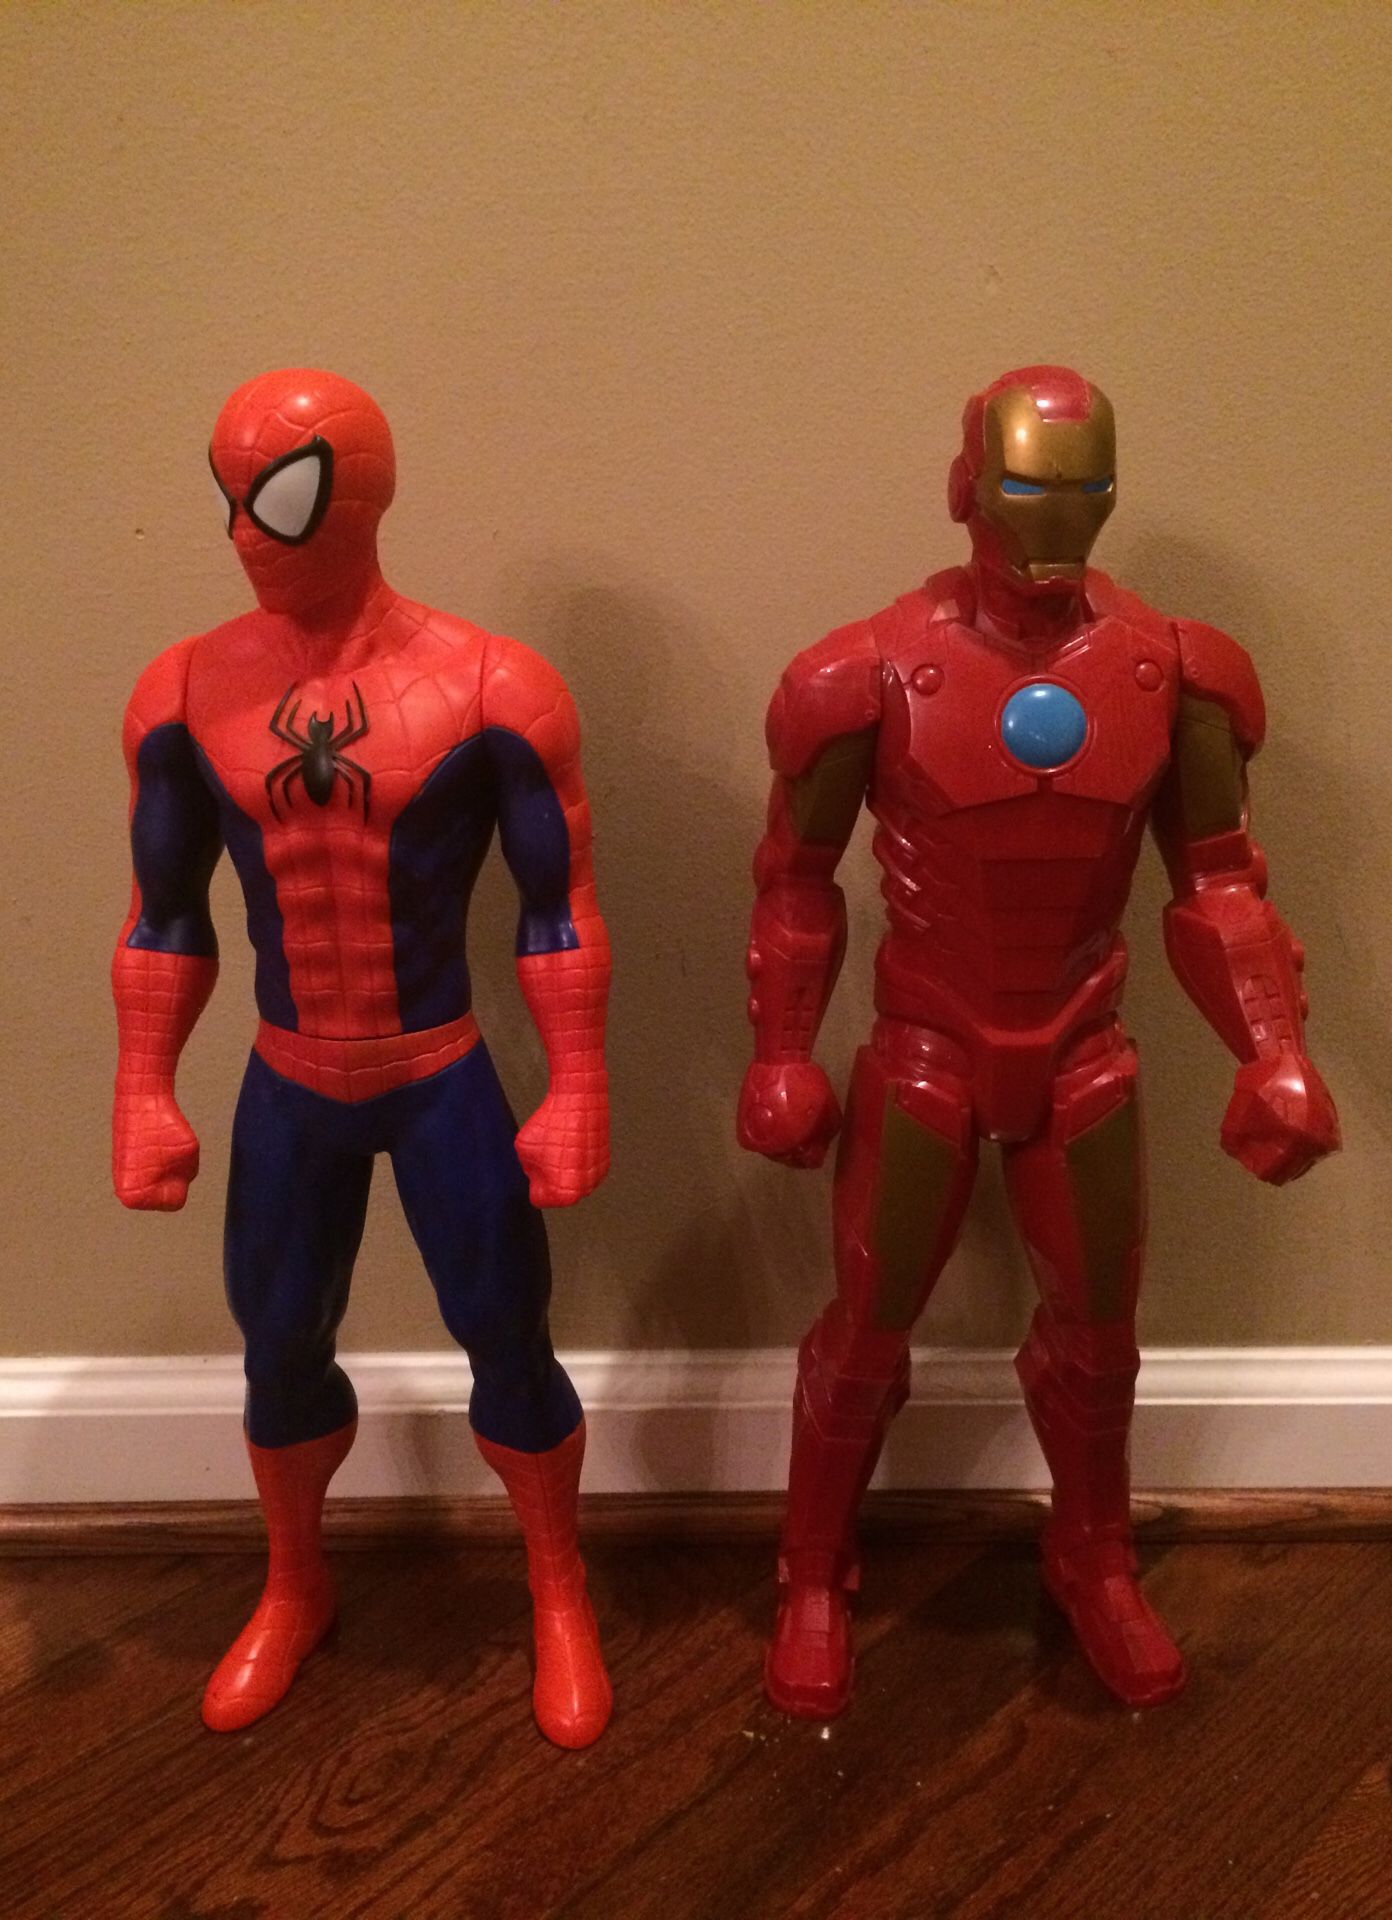 Toy-Action figures 20” tall. Spider-man. Comes from a smoke free and pet free home.